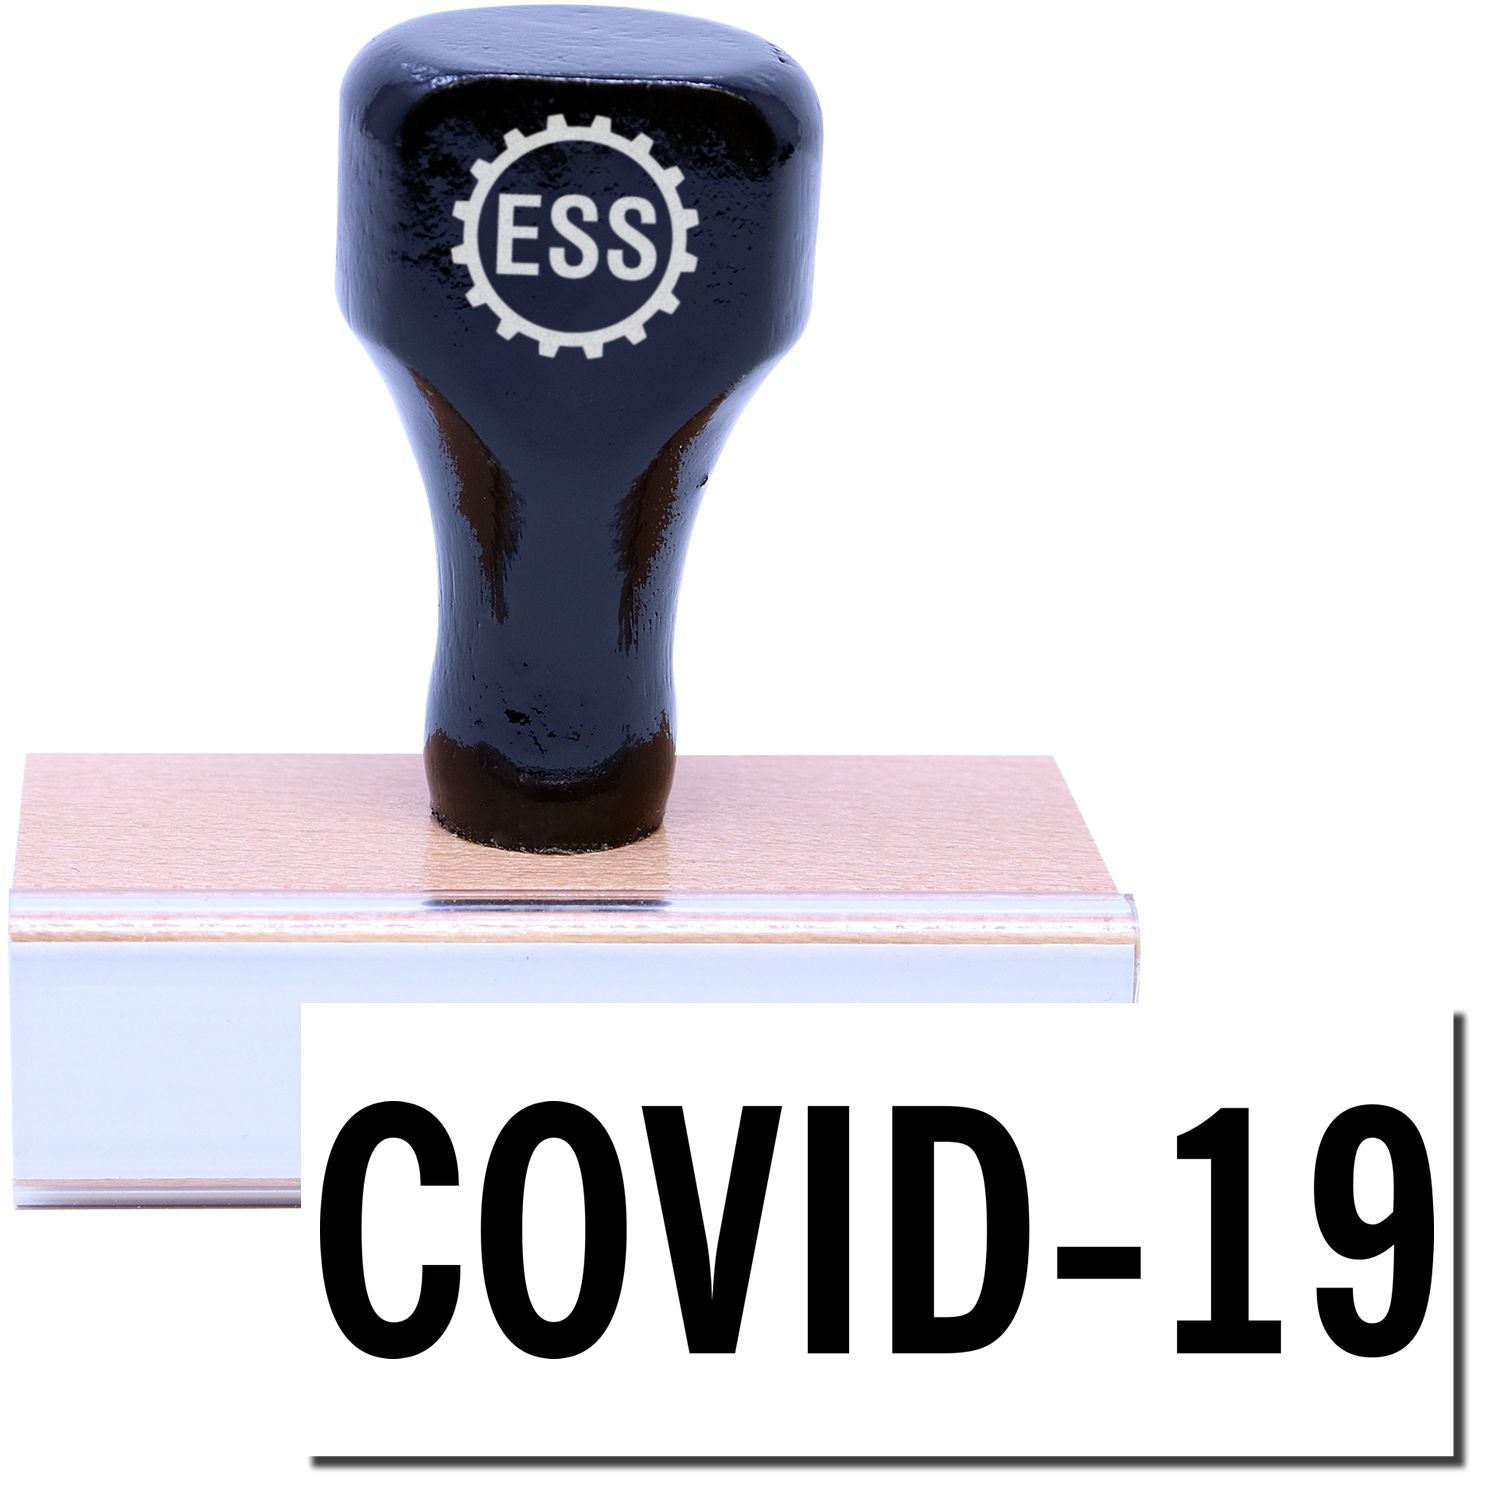 A stock office rubber stamp with a stamped image showing how the text "COVID-19" in bold font is displayed after stamping.